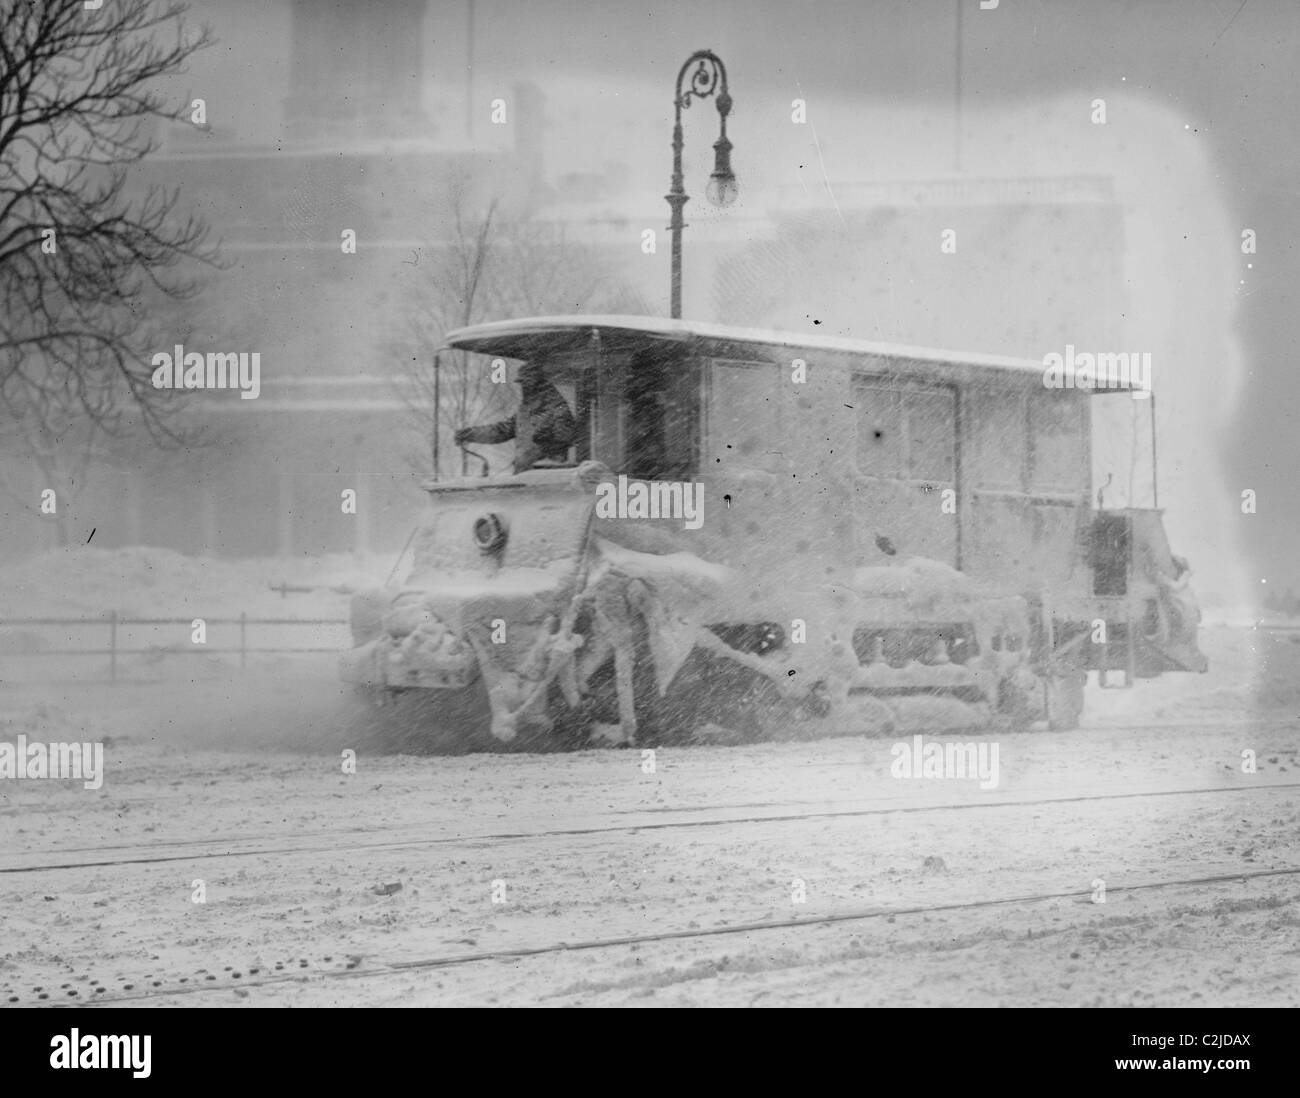 Trolley Snowplow Pushes ahead in heavy snowfall on New York Streets Stock Photo